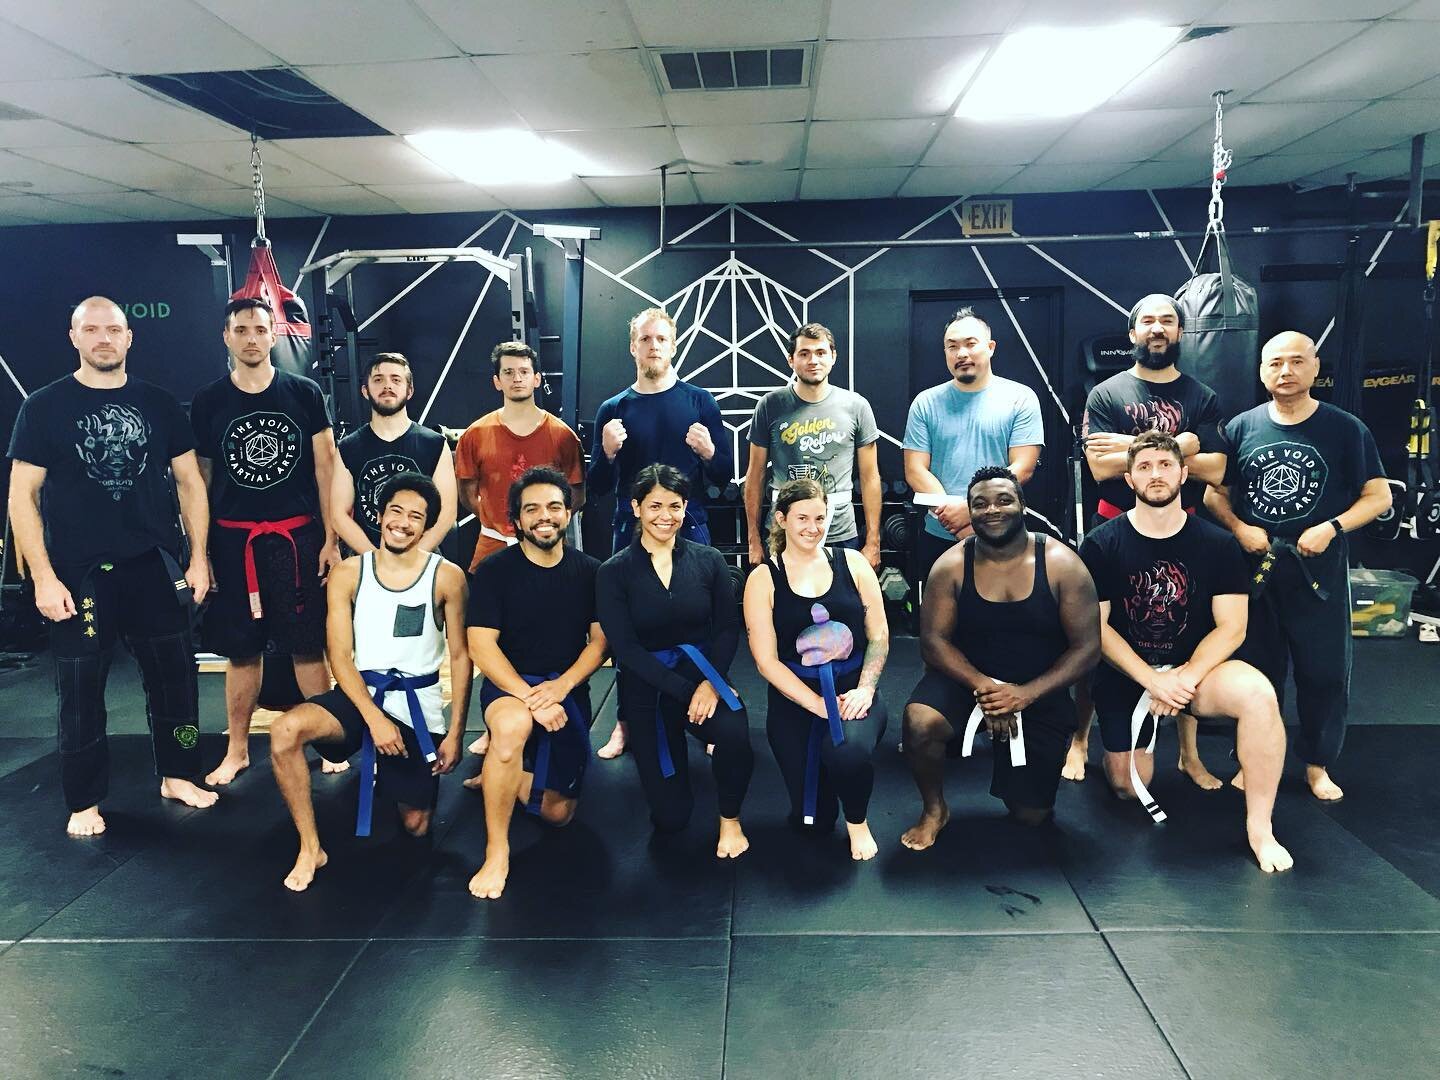 Iron Mantis Seminar. Congrats to those who leveled up and to those who are getting started!

Iron Mantis is a complete martial arts system rooted in traditional and modern teachings. It is striking, grappling, takedown/throws, jiujitsu and submission